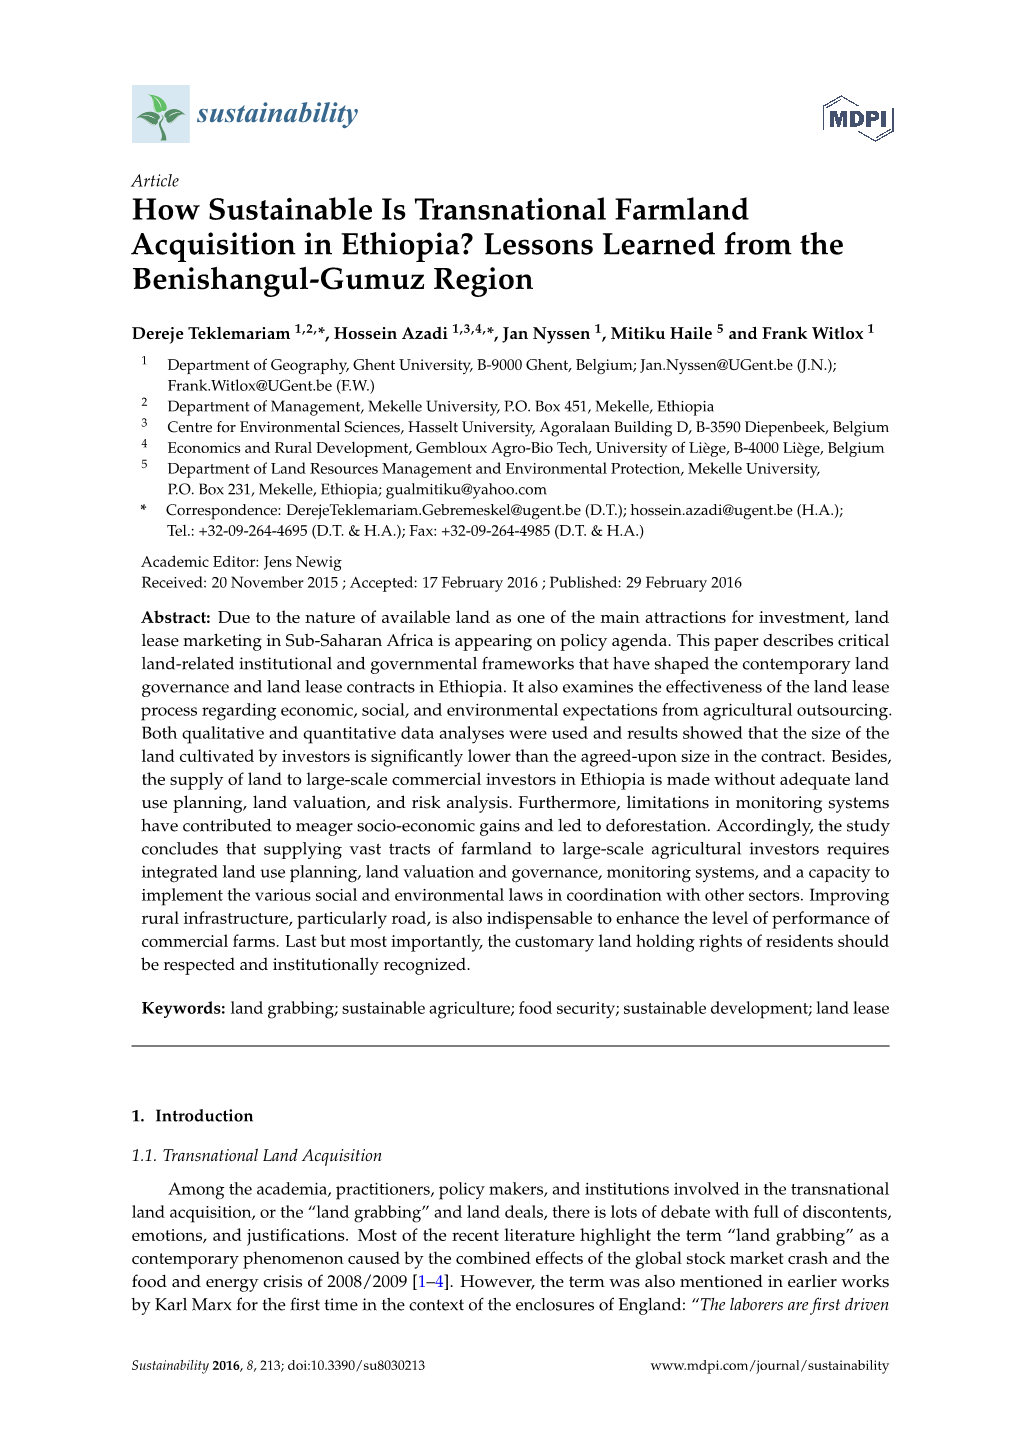 How Sustainable Is Transnational Farmland Acquisition in Ethiopia? Lessons Learned from the Benishangul-Gumuz Region